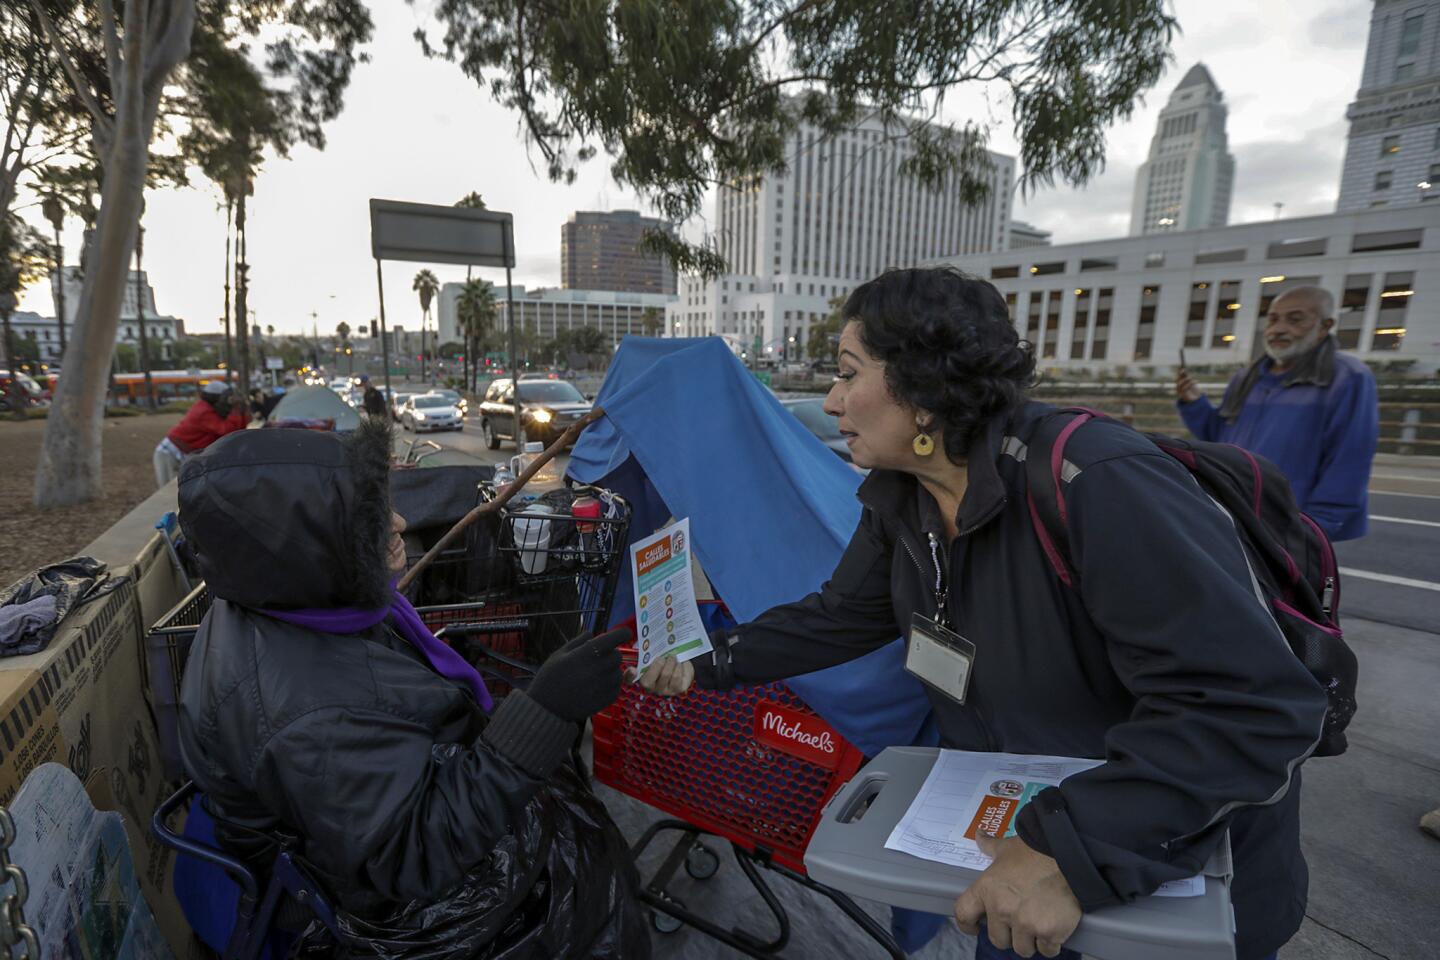 Homeless tent camps